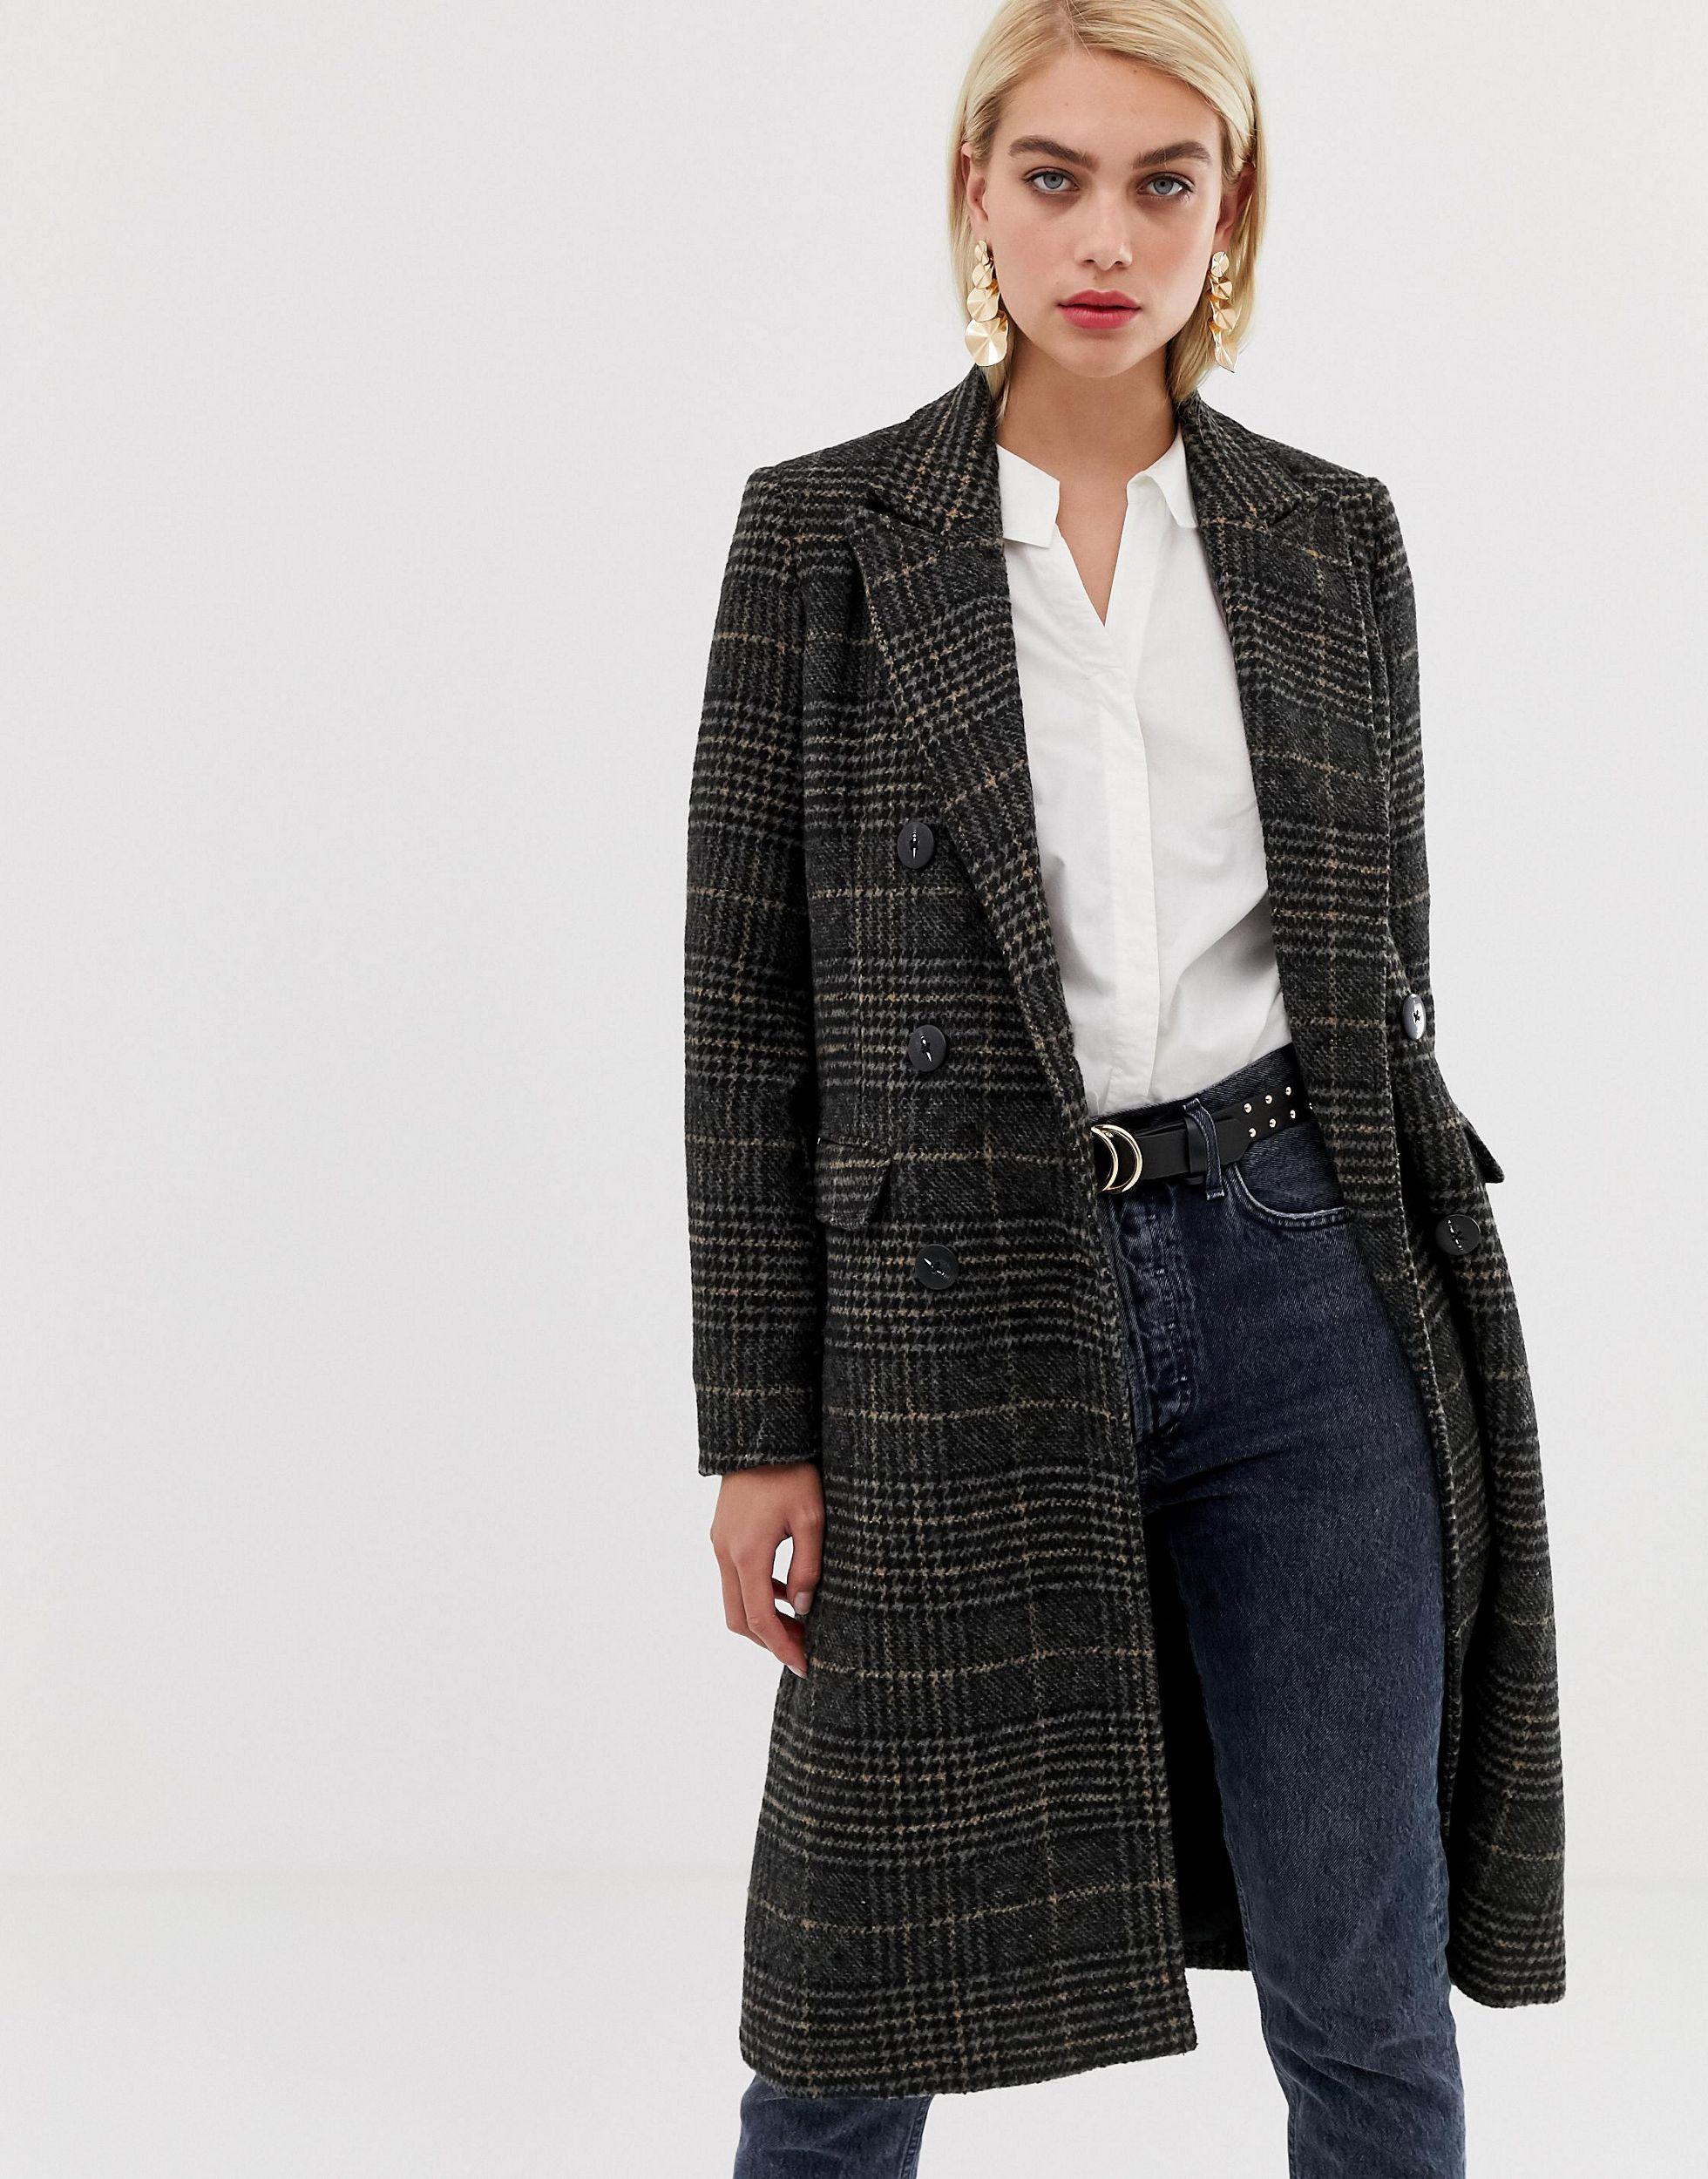 Vero Moda Synthetic Check Tailored Coat in Brown - Lyst